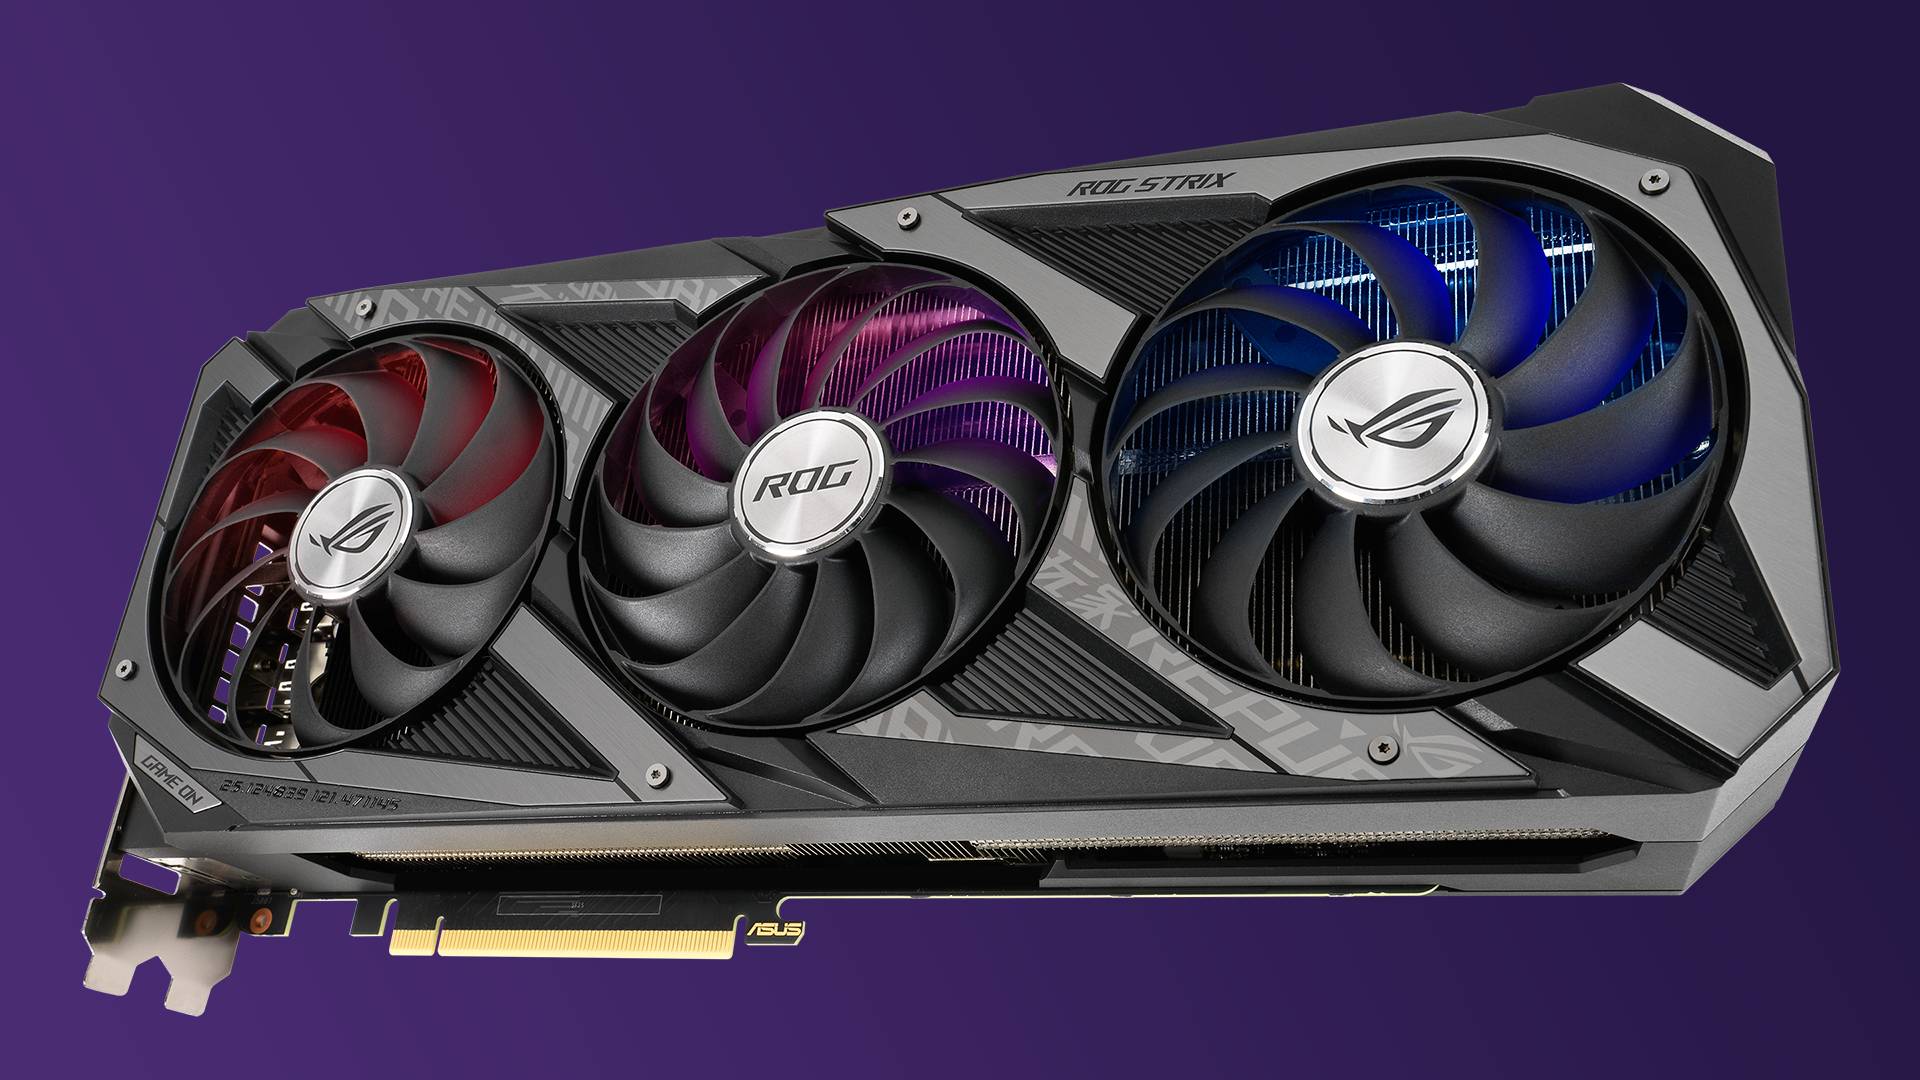 Nvidia’s RTX 3080 12GB GPU is now a thing, and preorders could pop up soon